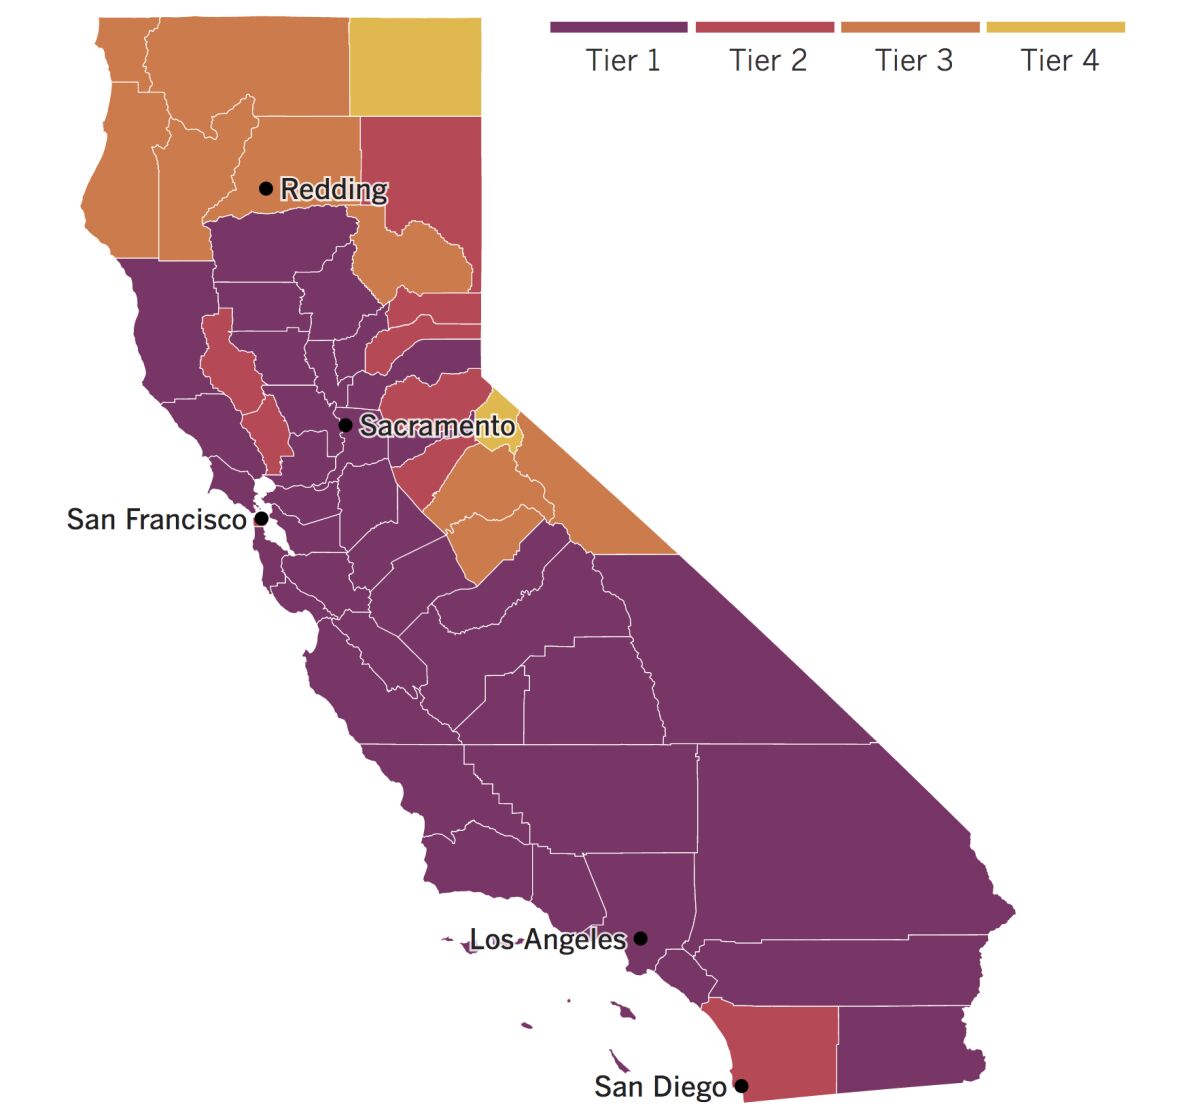 A map of California showing counties by which tier they're in under the state's system of coronavirus reopening rules.